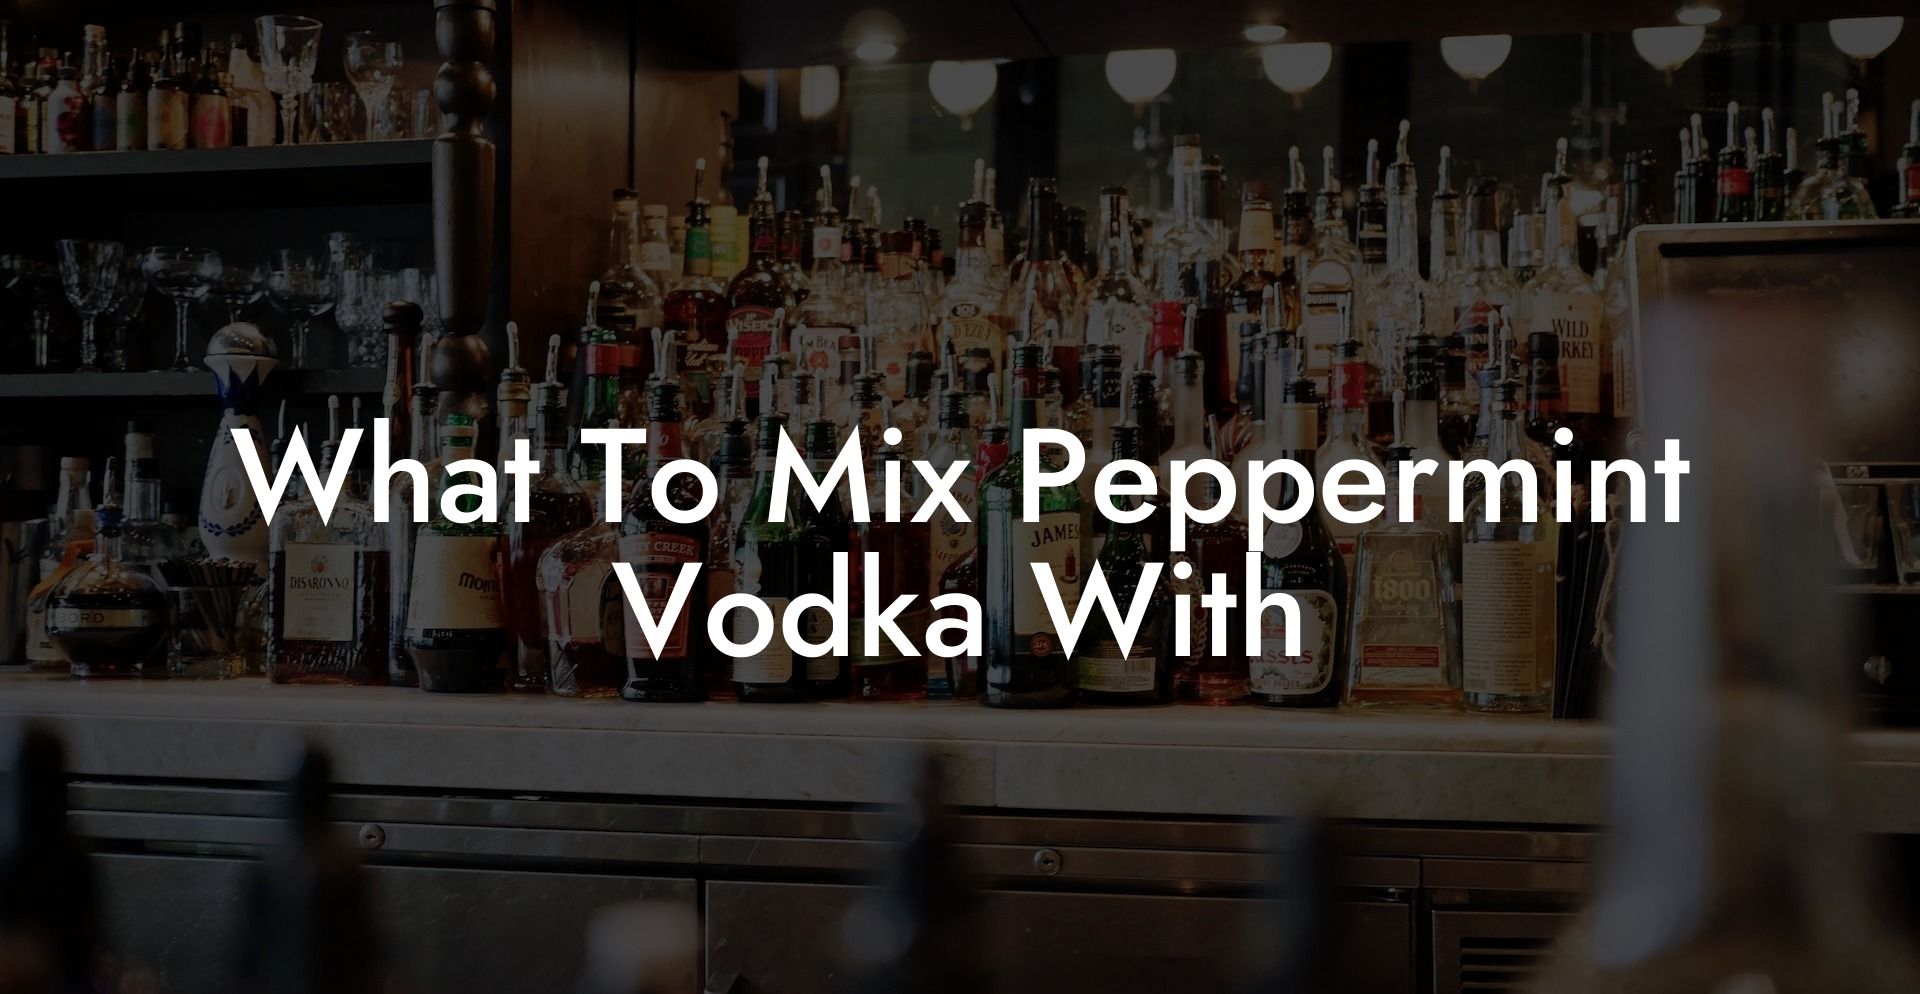 What To Mix Peppermint Vodka With